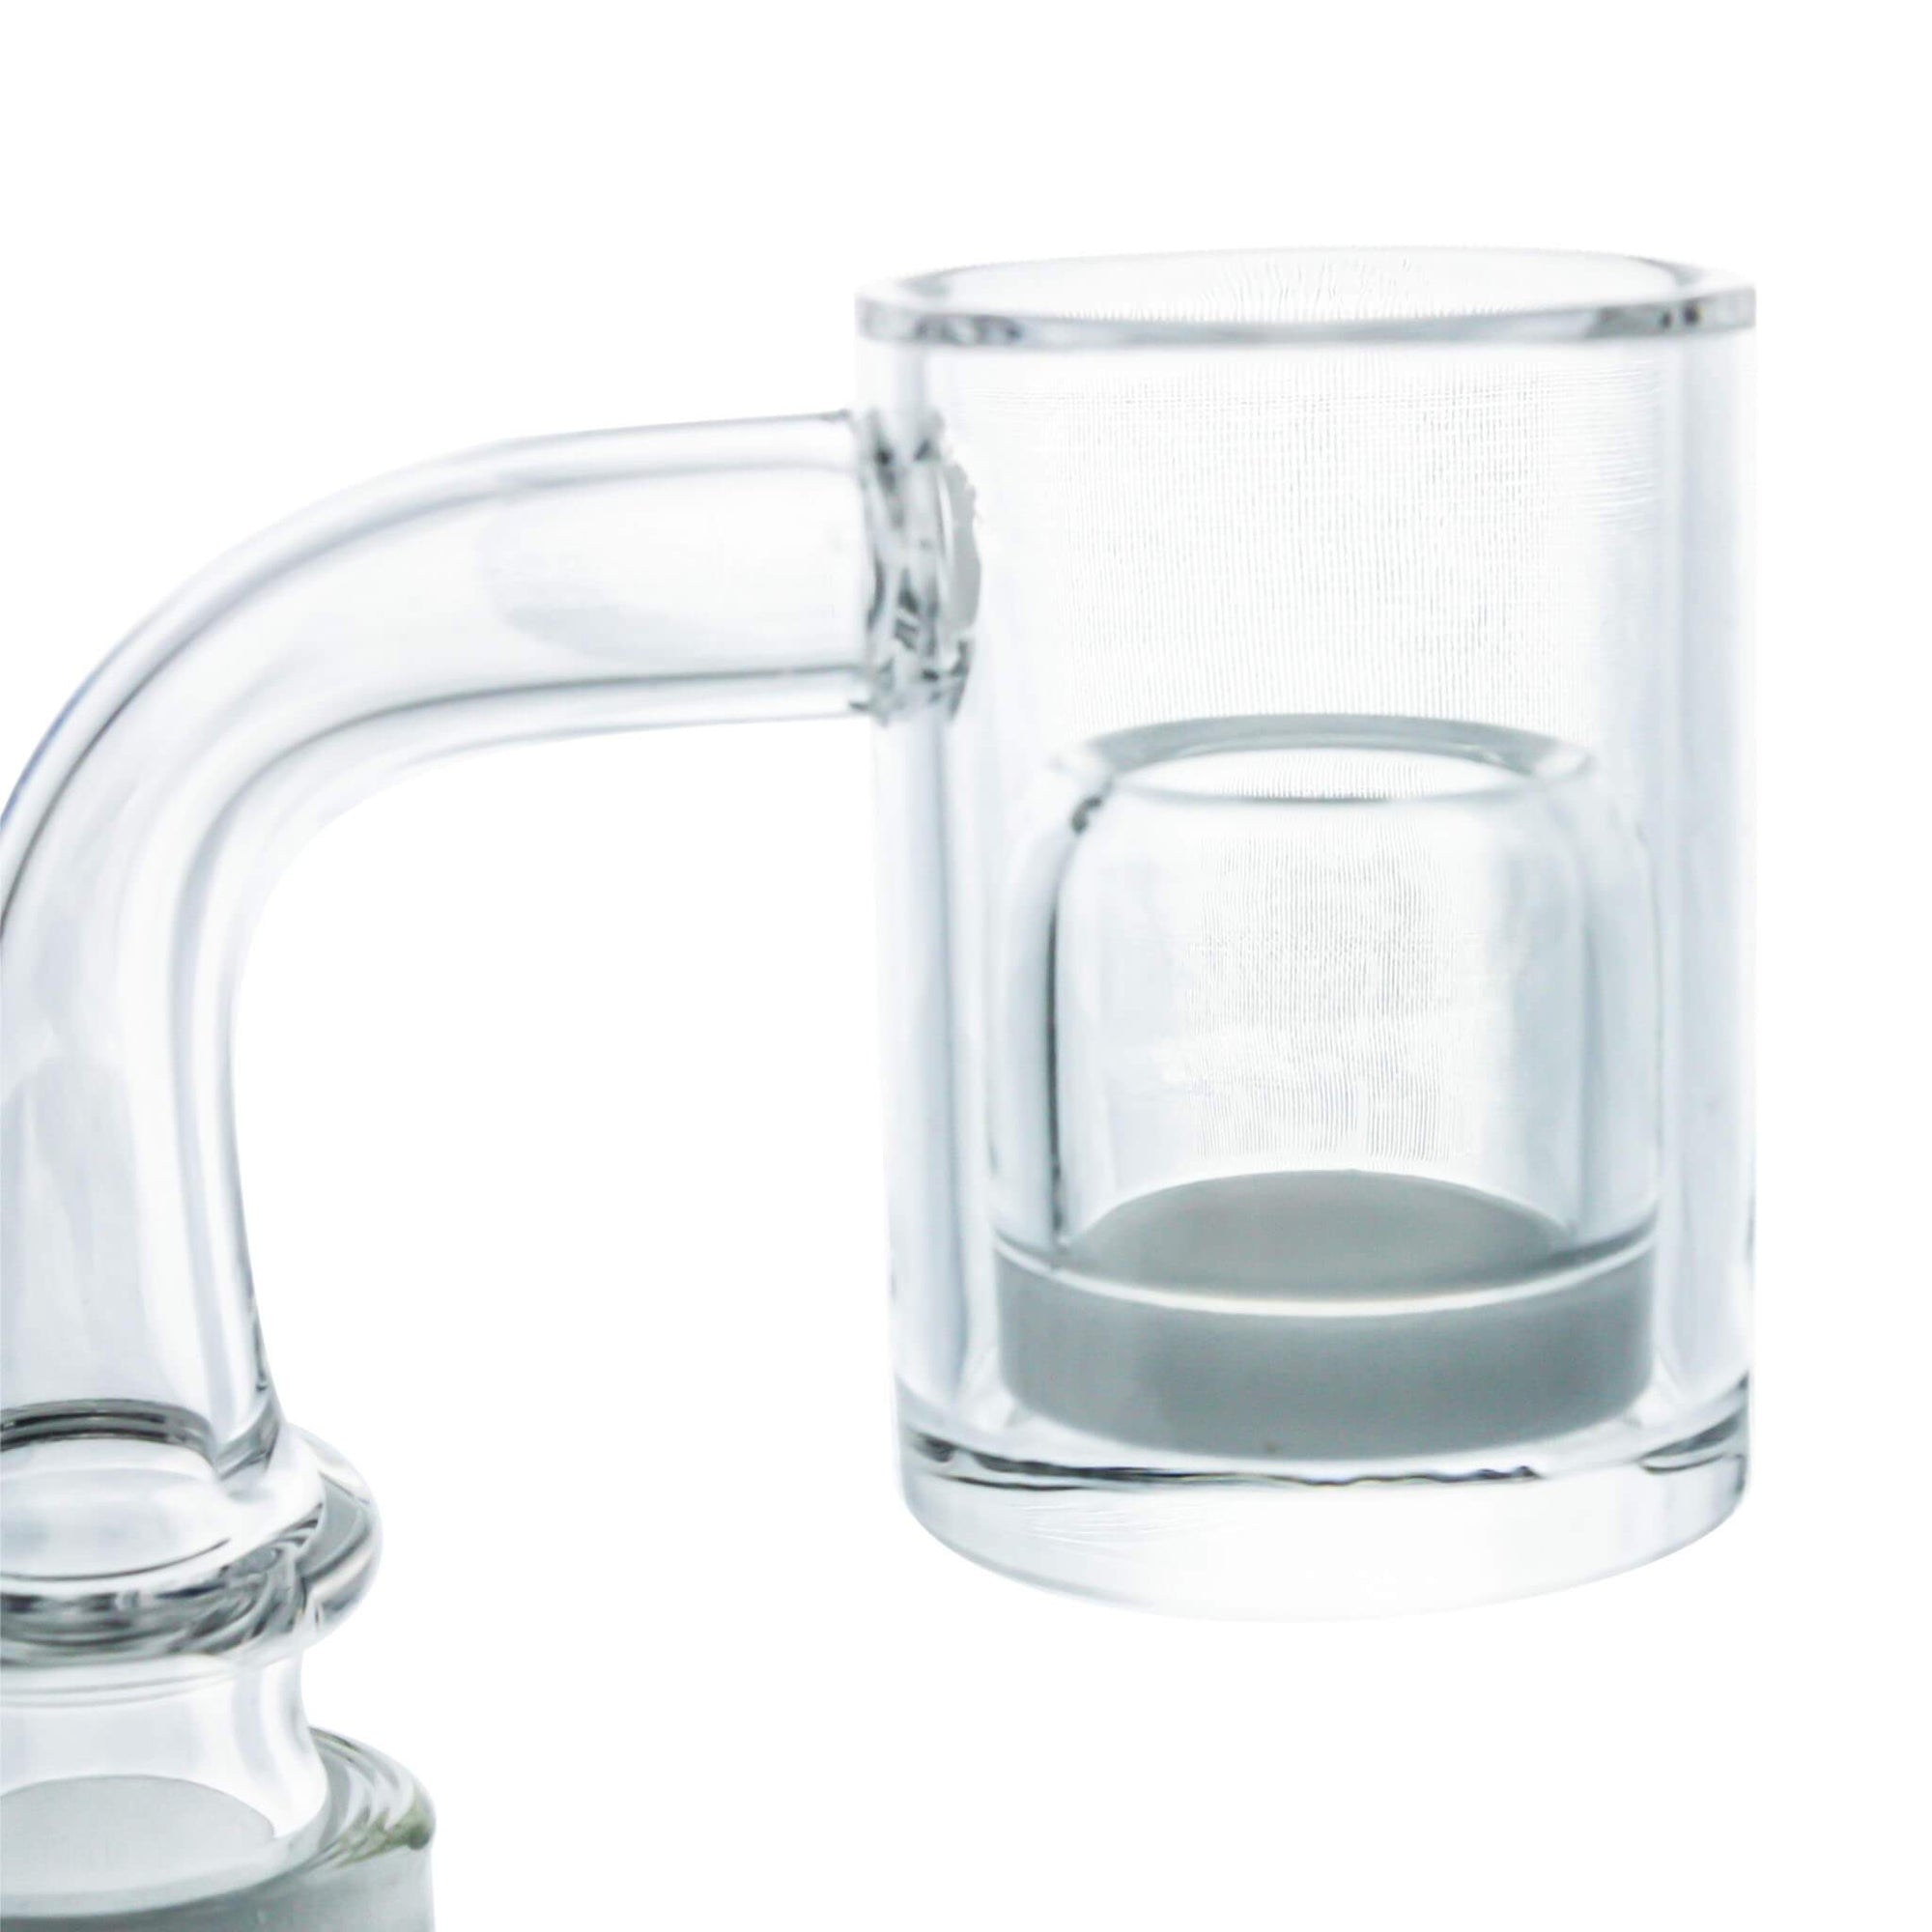 Opaque Bottom Quartz Insert Cup | Turtle Neck Close Up View | the dabbing specialists